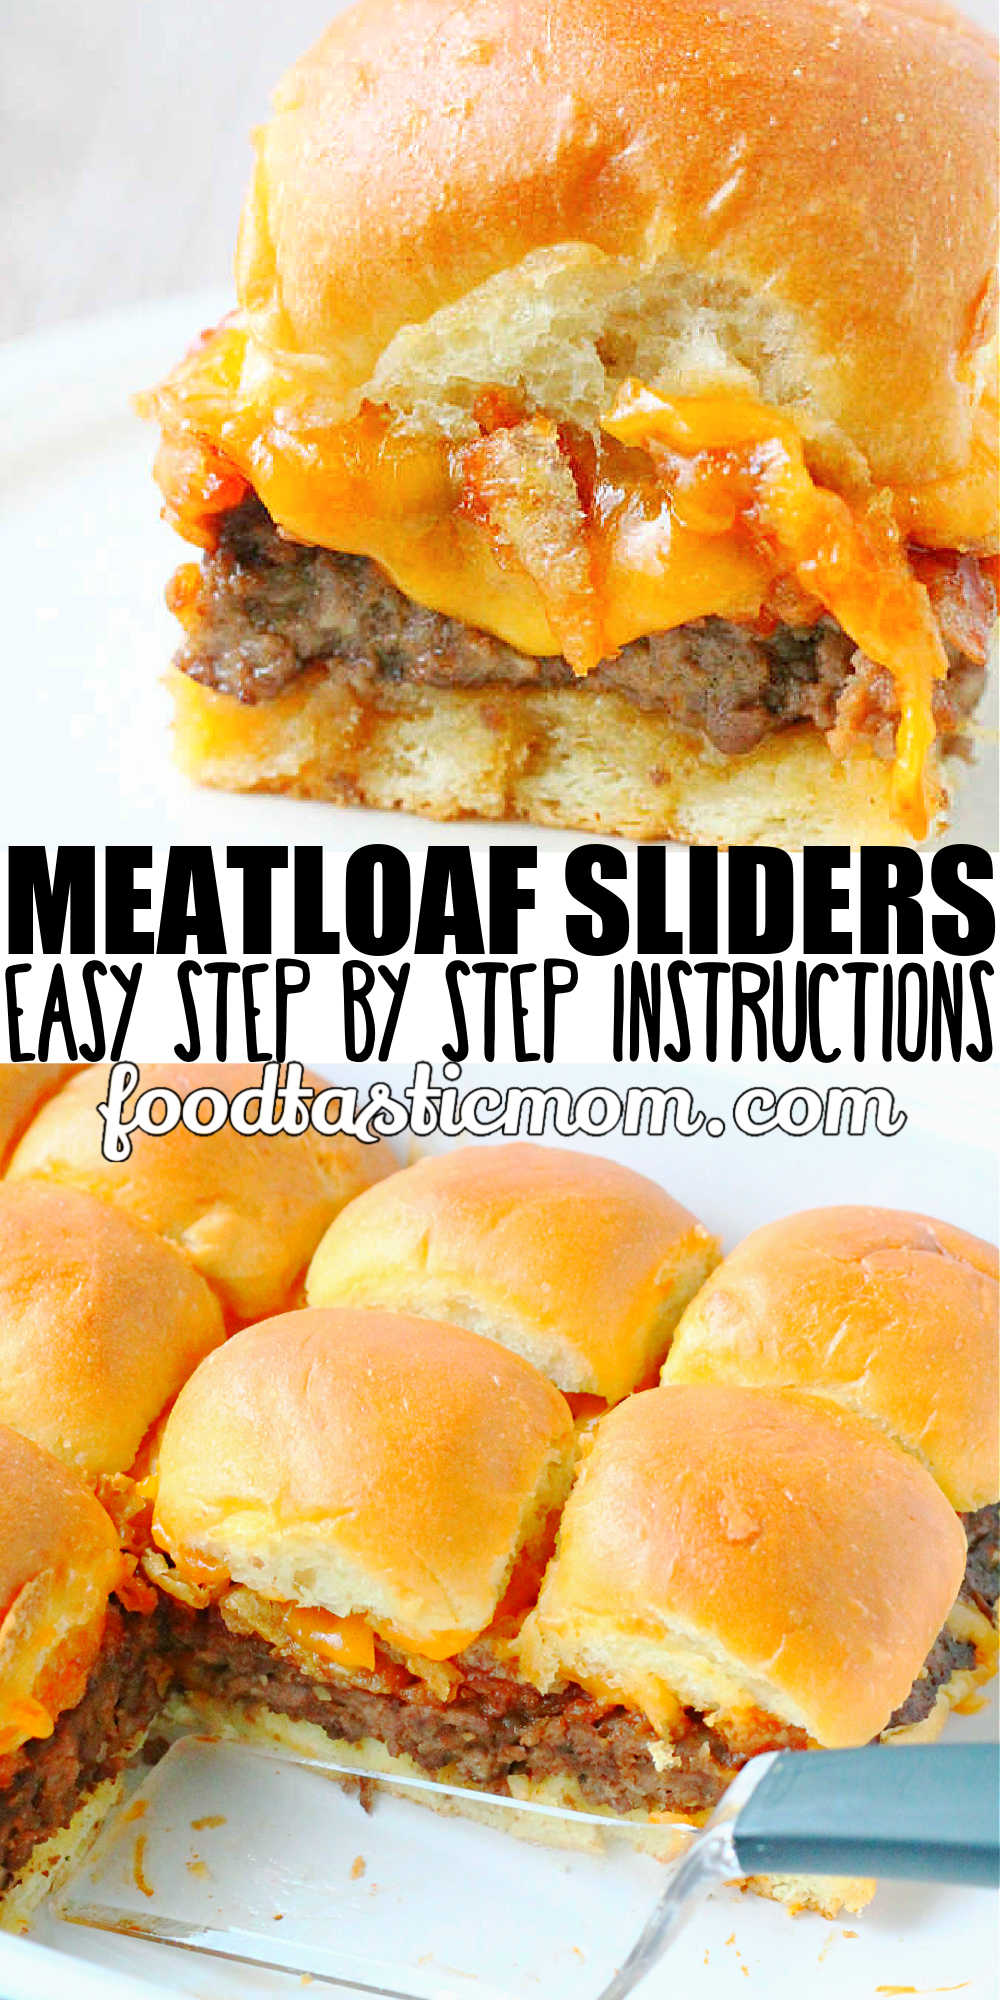 Serve these meatloaf sliders at your next party and everyone will be asking you for the recipe. Made with a unique way of baking the meatloaf seasoned burger and topped with french fried onions, cheddar and a sweet and tangy sauce. via @foodtasticmom